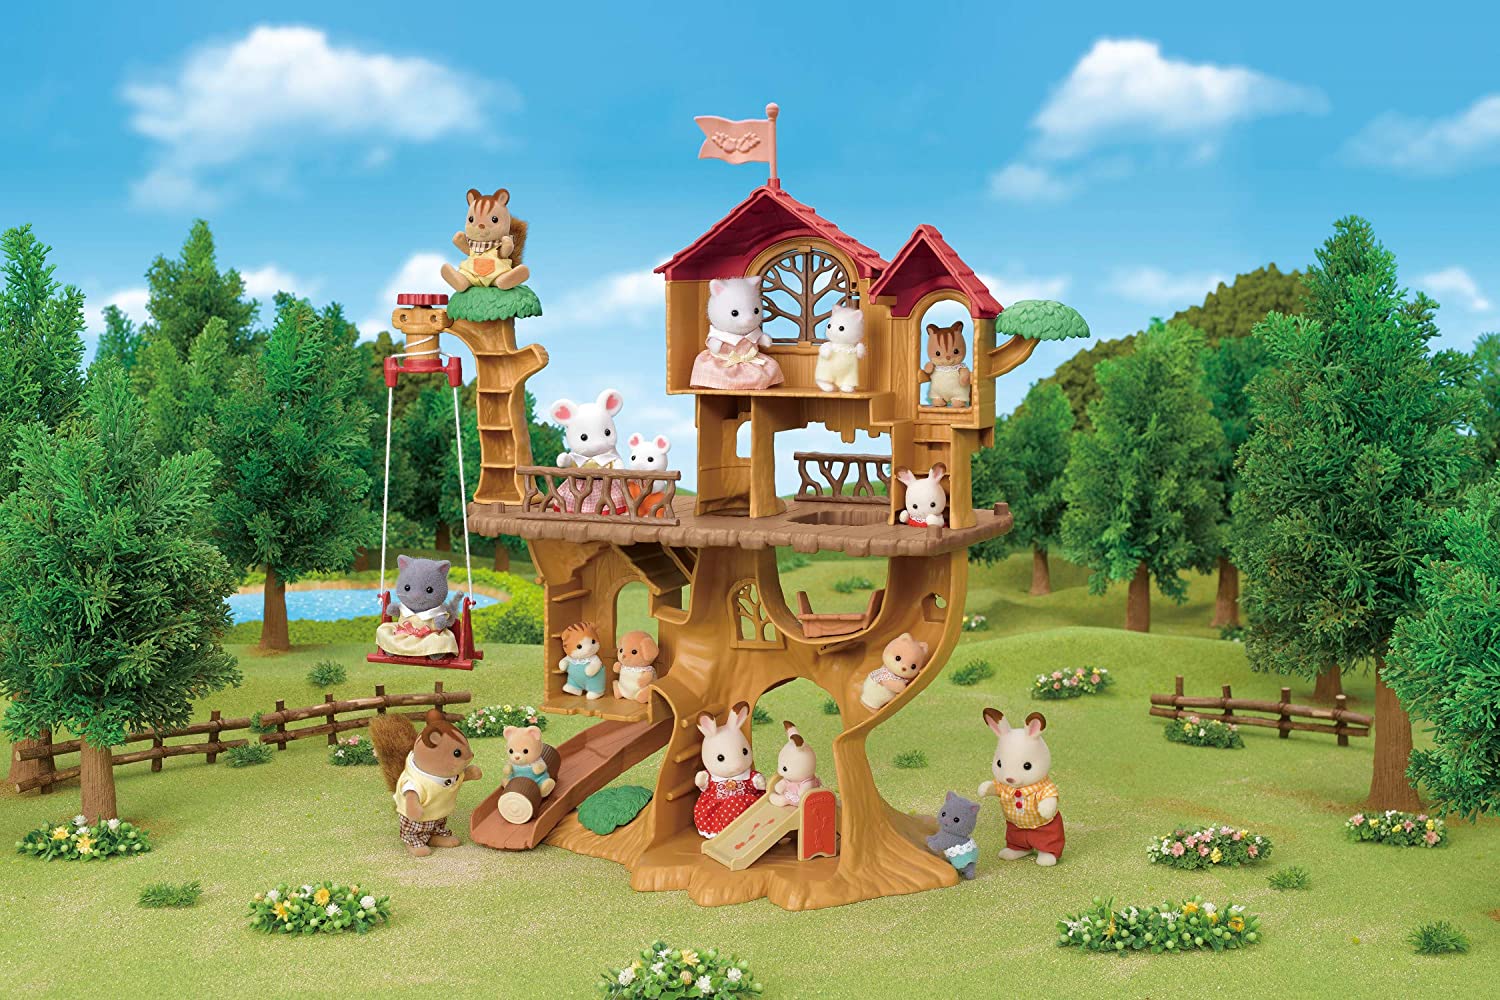 Calico Critters Adventure Tree House Gift Set - A2Z Science & Learning